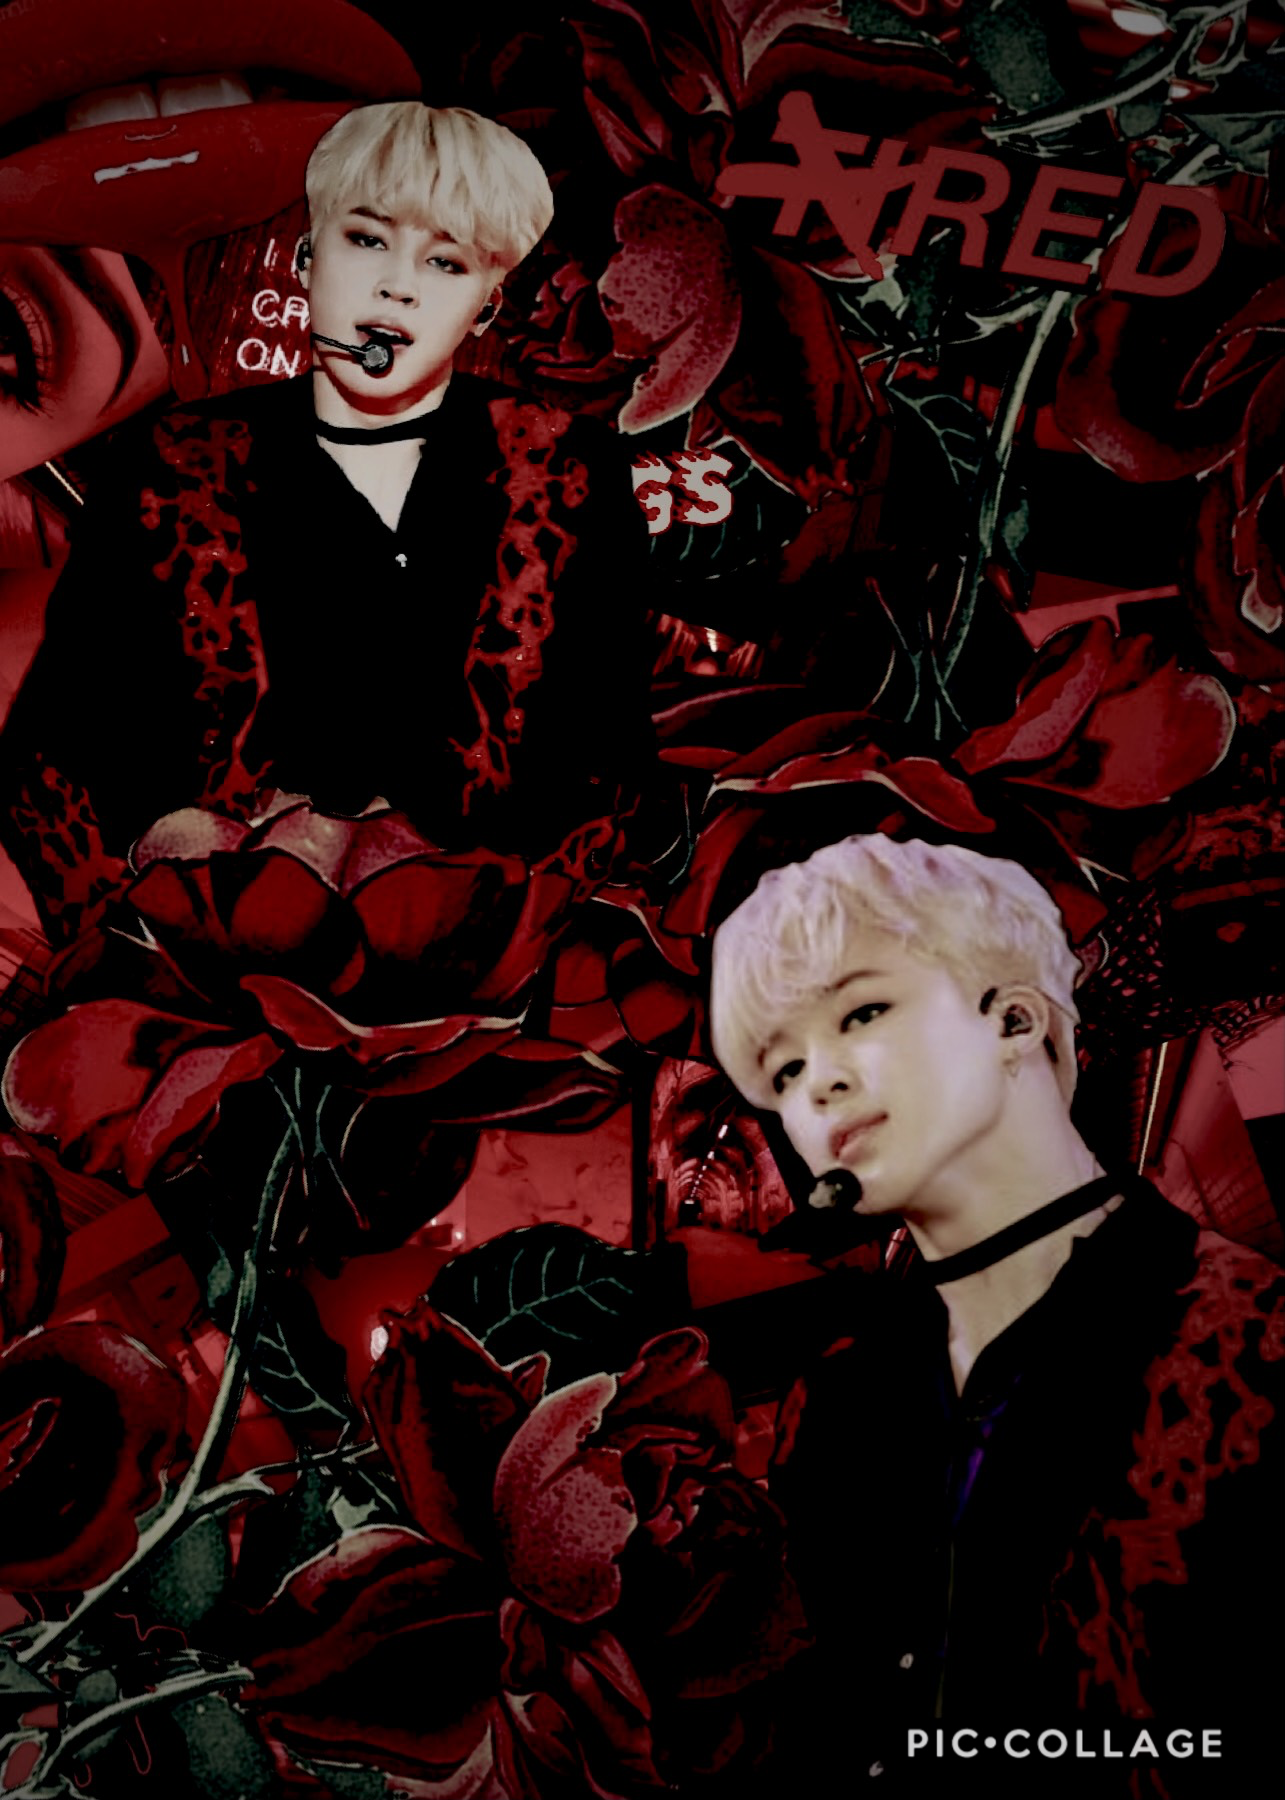 ❤️tap🖤

Heyyy how’s life? idk why I keep doing Jimin edits recently he just fits into so many of my themes lol

please join our meme contest on our join account @BTSisMyRatatouille

qotd: cats or dogs?

aotd: CATS 😸